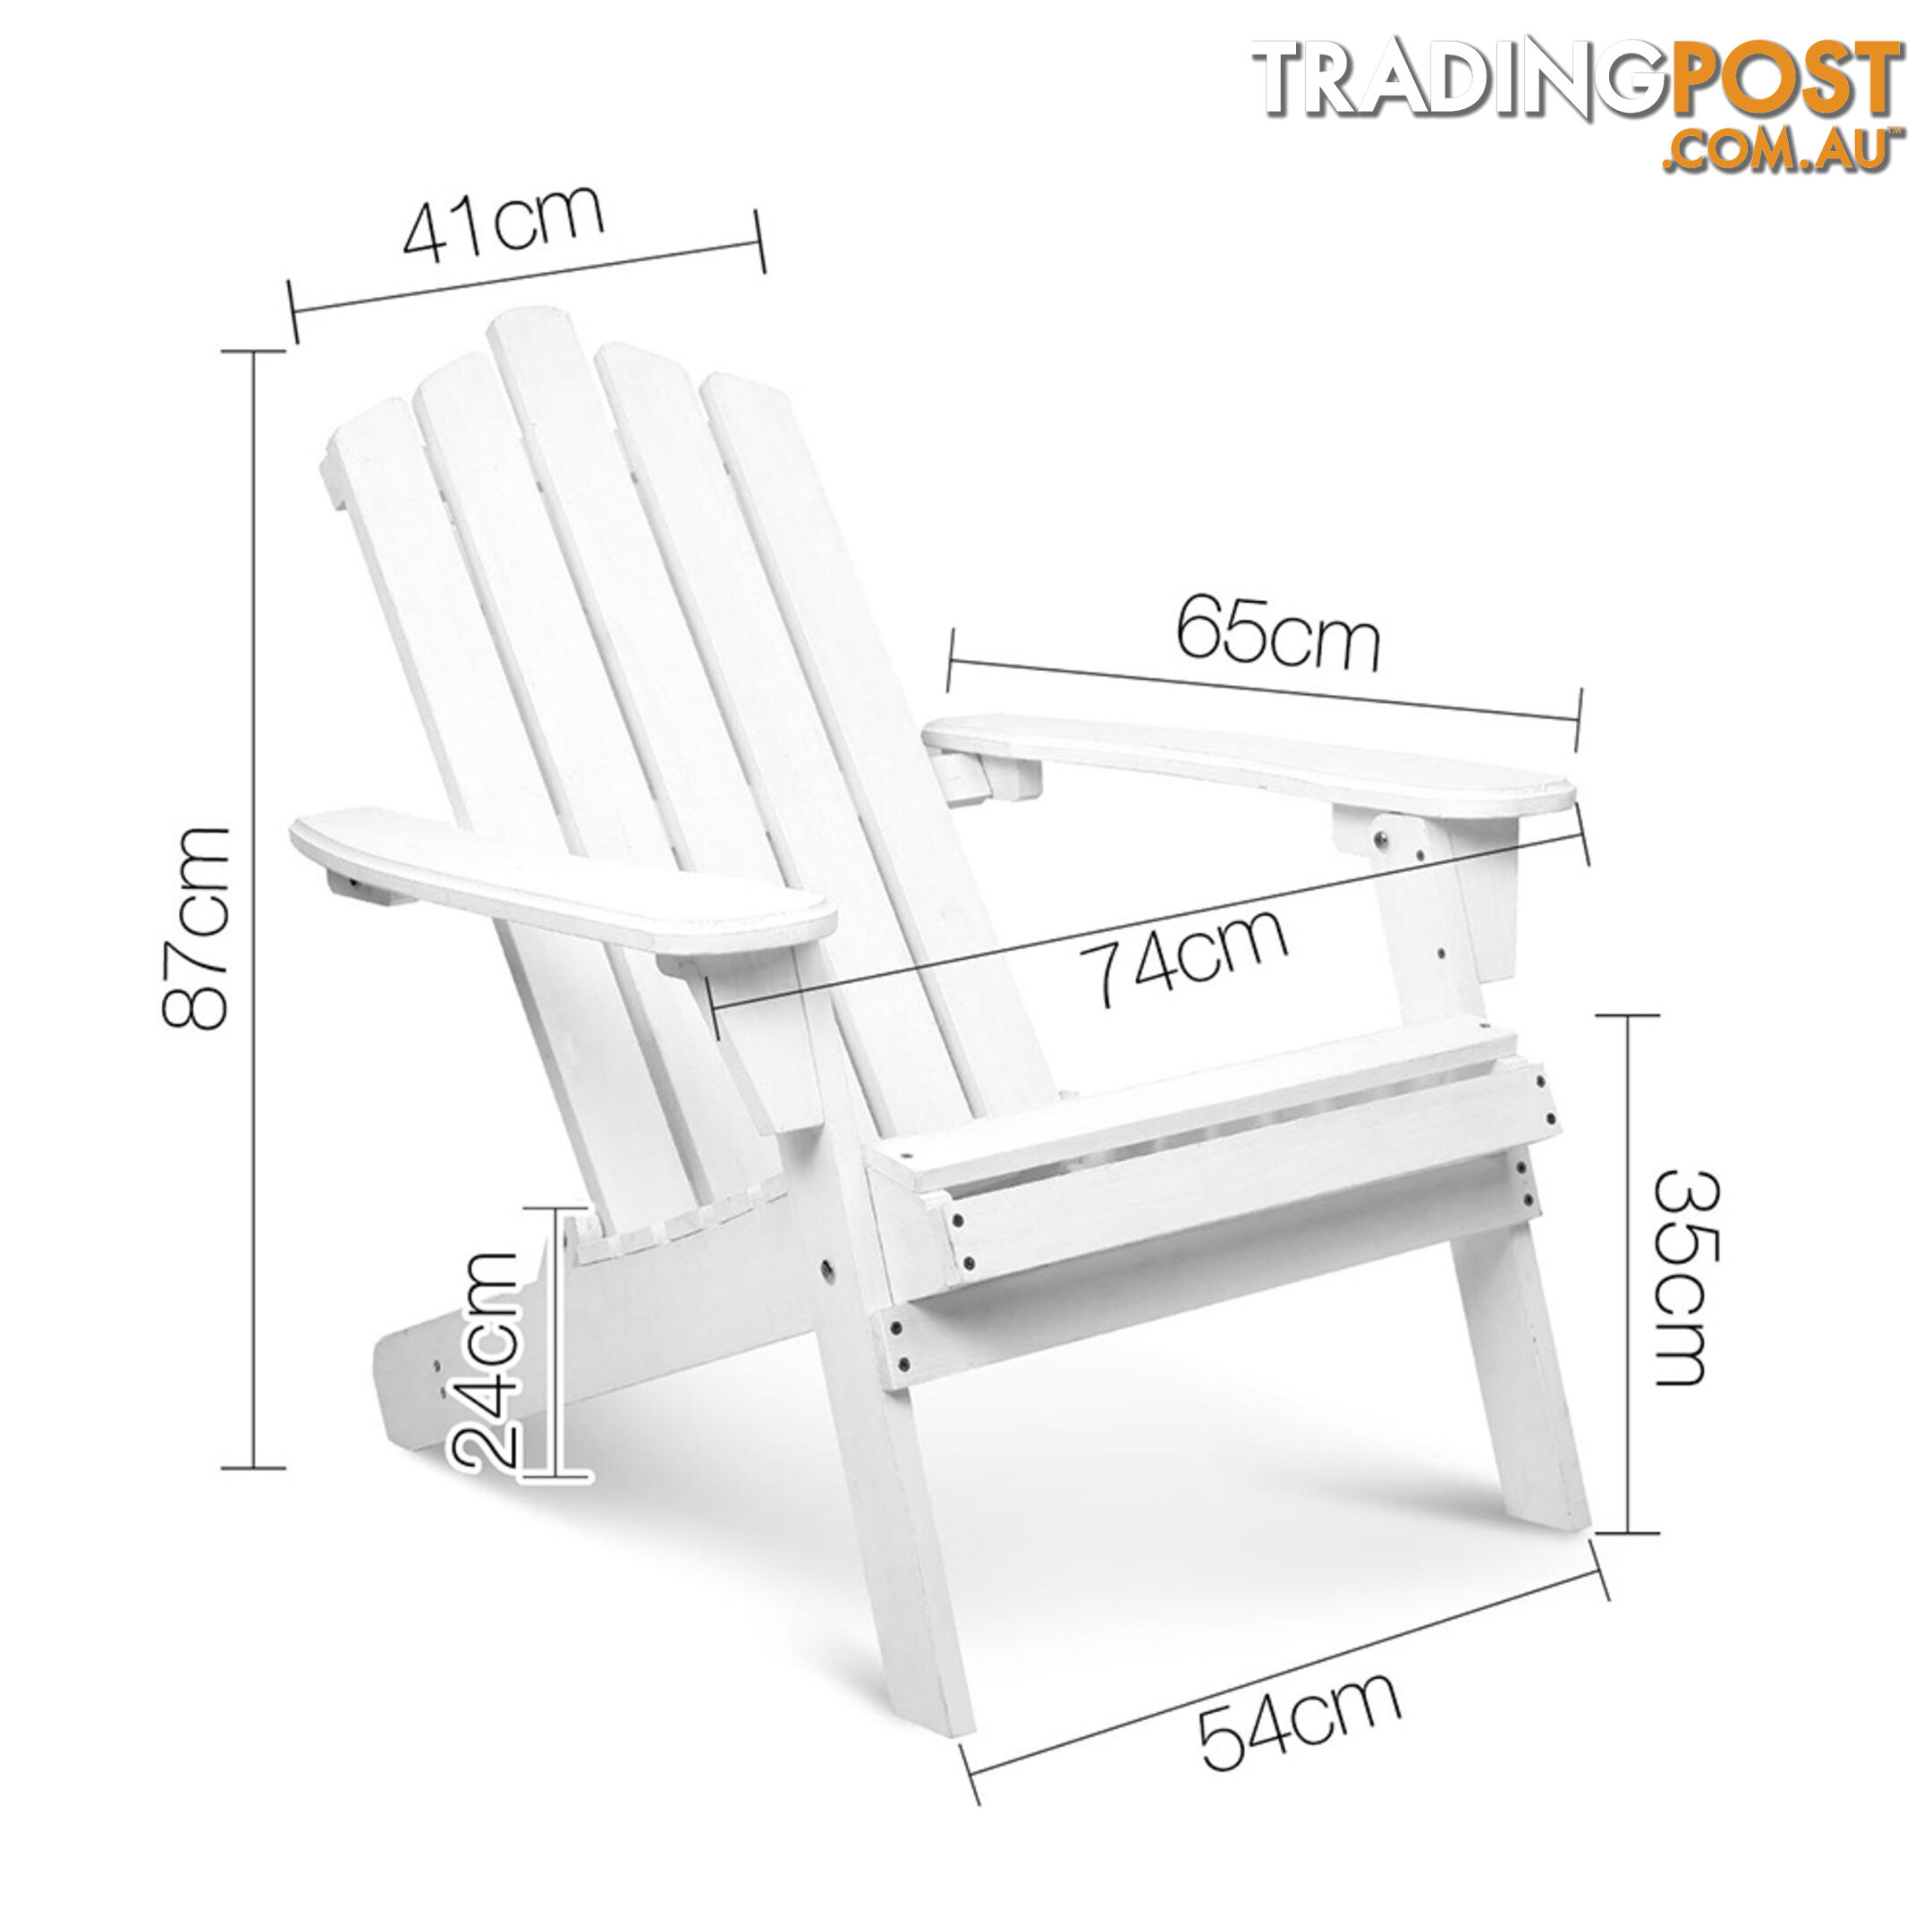 New Adirondack Foldable Wood Chair Side Table Set Outdoor Garden Deck Furniture